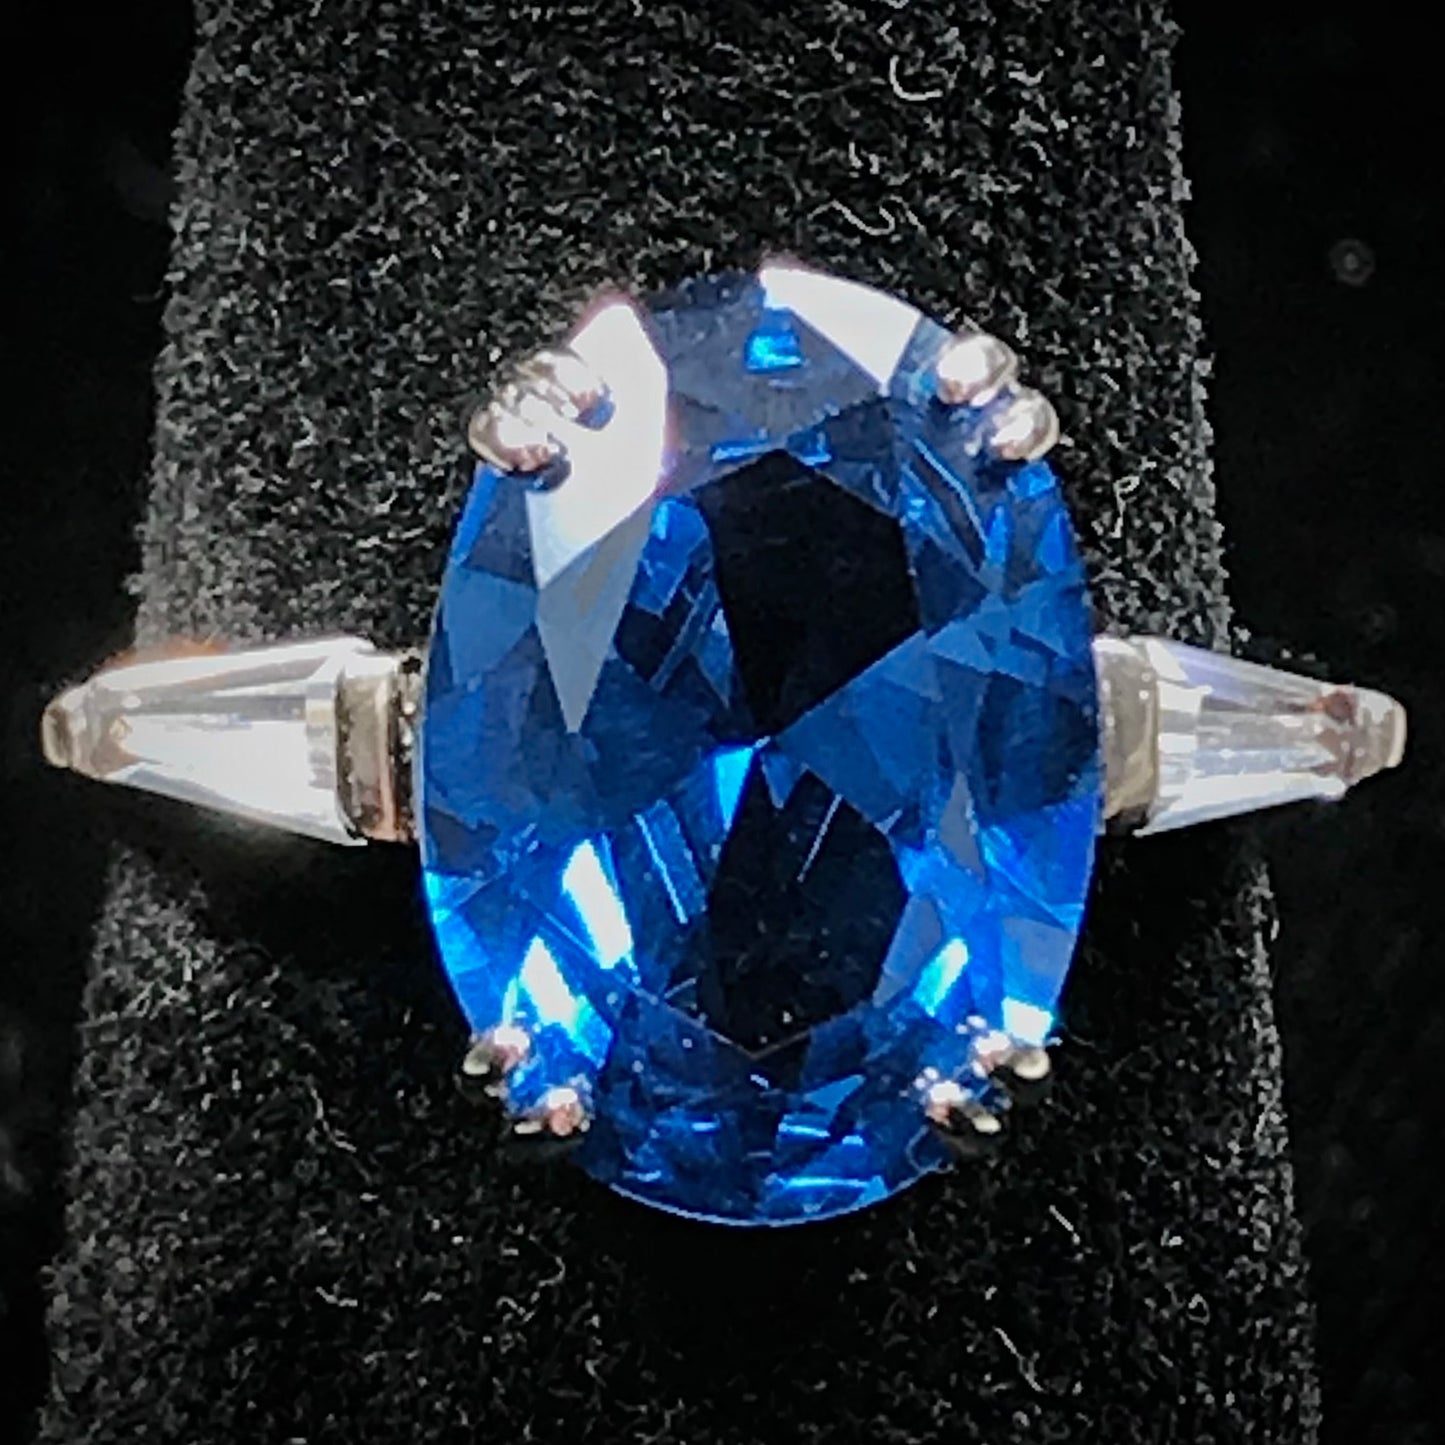 A sterling silver ring set with a faceted oval cut blue spinel and cubic zirconia baguettes.